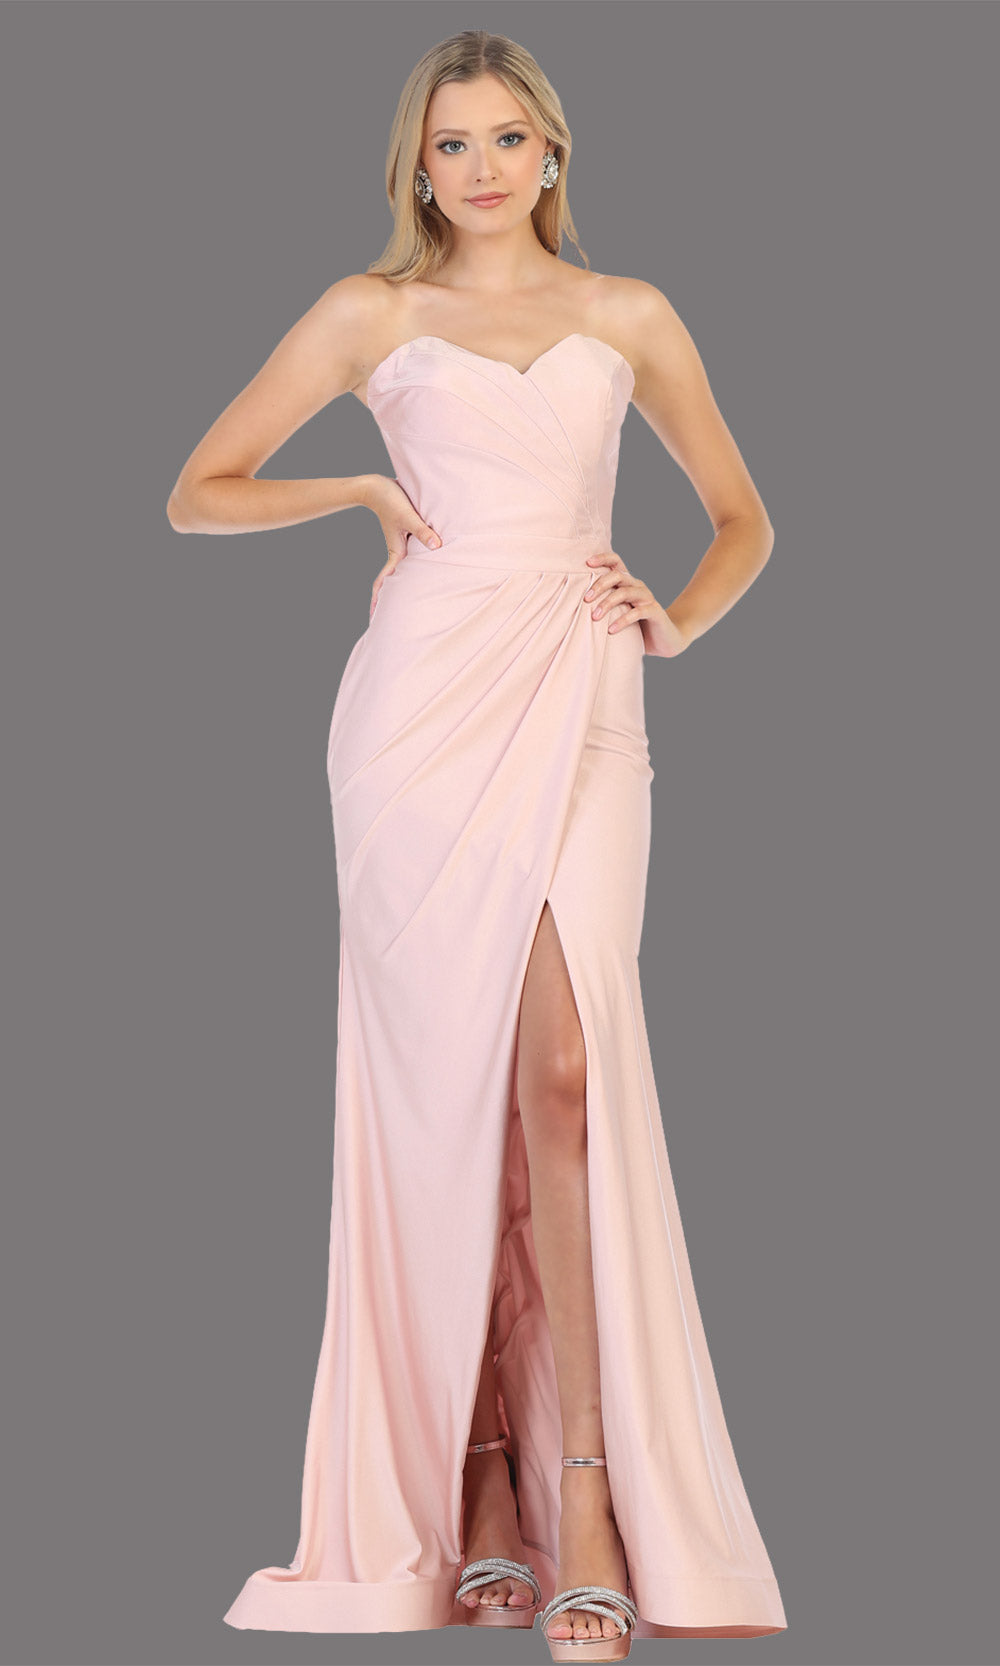 Mayqueen MQ1718 long mauve fitted strapless dress w/high slit. This sleek & sexy dusty rose dress is perfect as a bridesmaid dress, prom dress, formal wedding guest dress, gala, black tie event, engagement/e-shoot dress. Plus sizes available